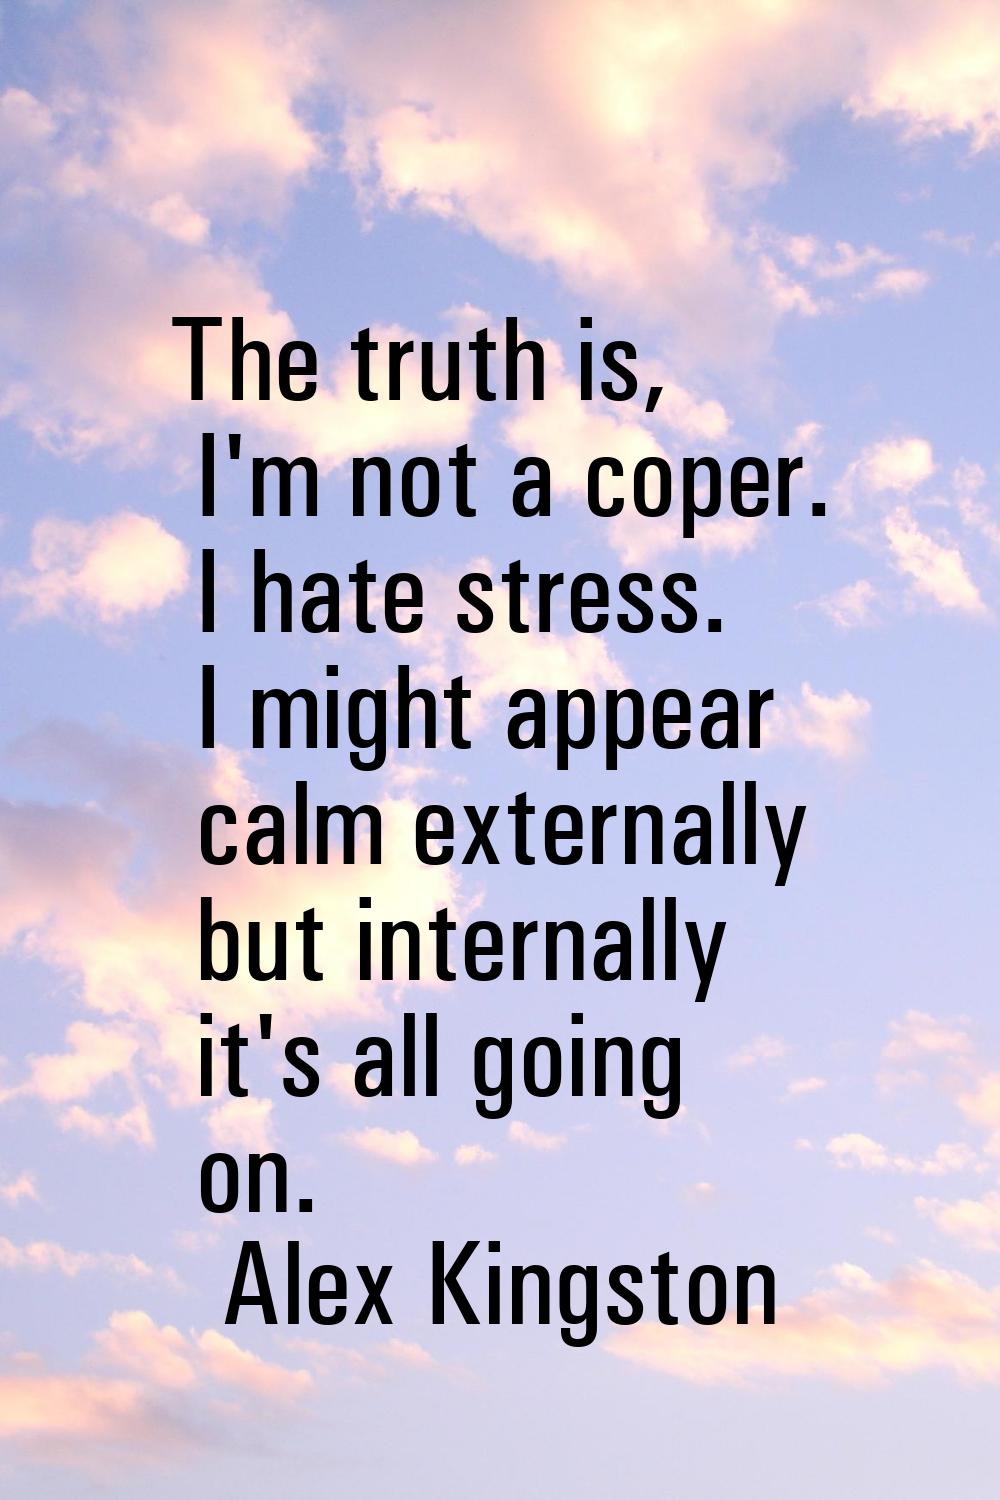 The truth is, I'm not a coper. I hate stress. I might appear calm externally but internally it's al